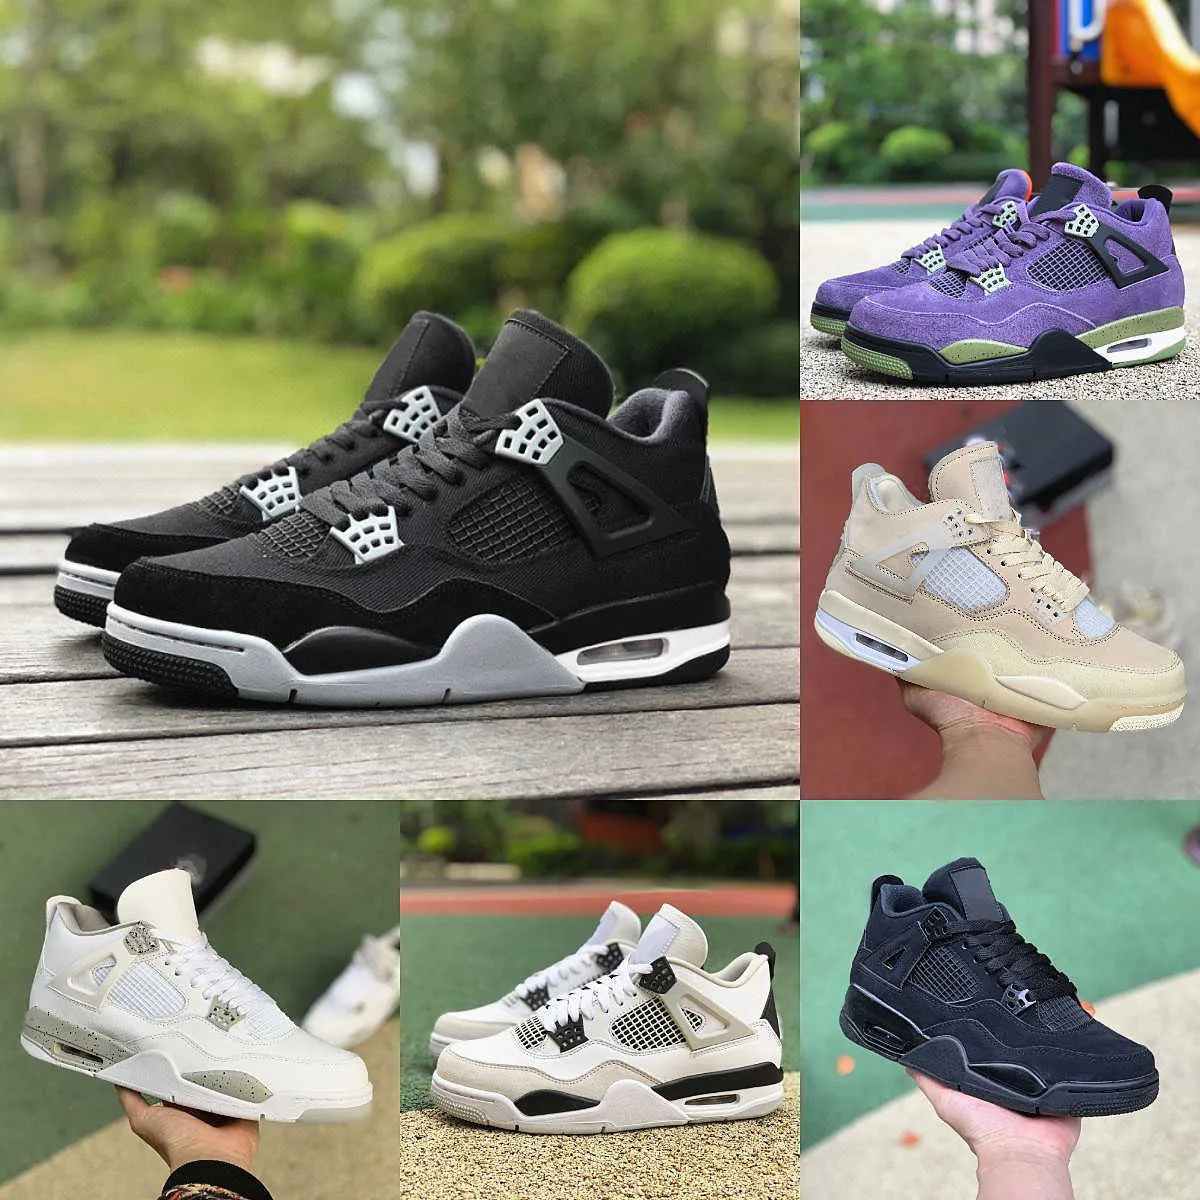 2023 Jumpman Red Thunder 4 4S Basketball Shoes University Blue Mens Militair Zwart Canvas Cement Cement Crème Sail White Oreo Infrared Canyon Purple Trainer Sneakers S8